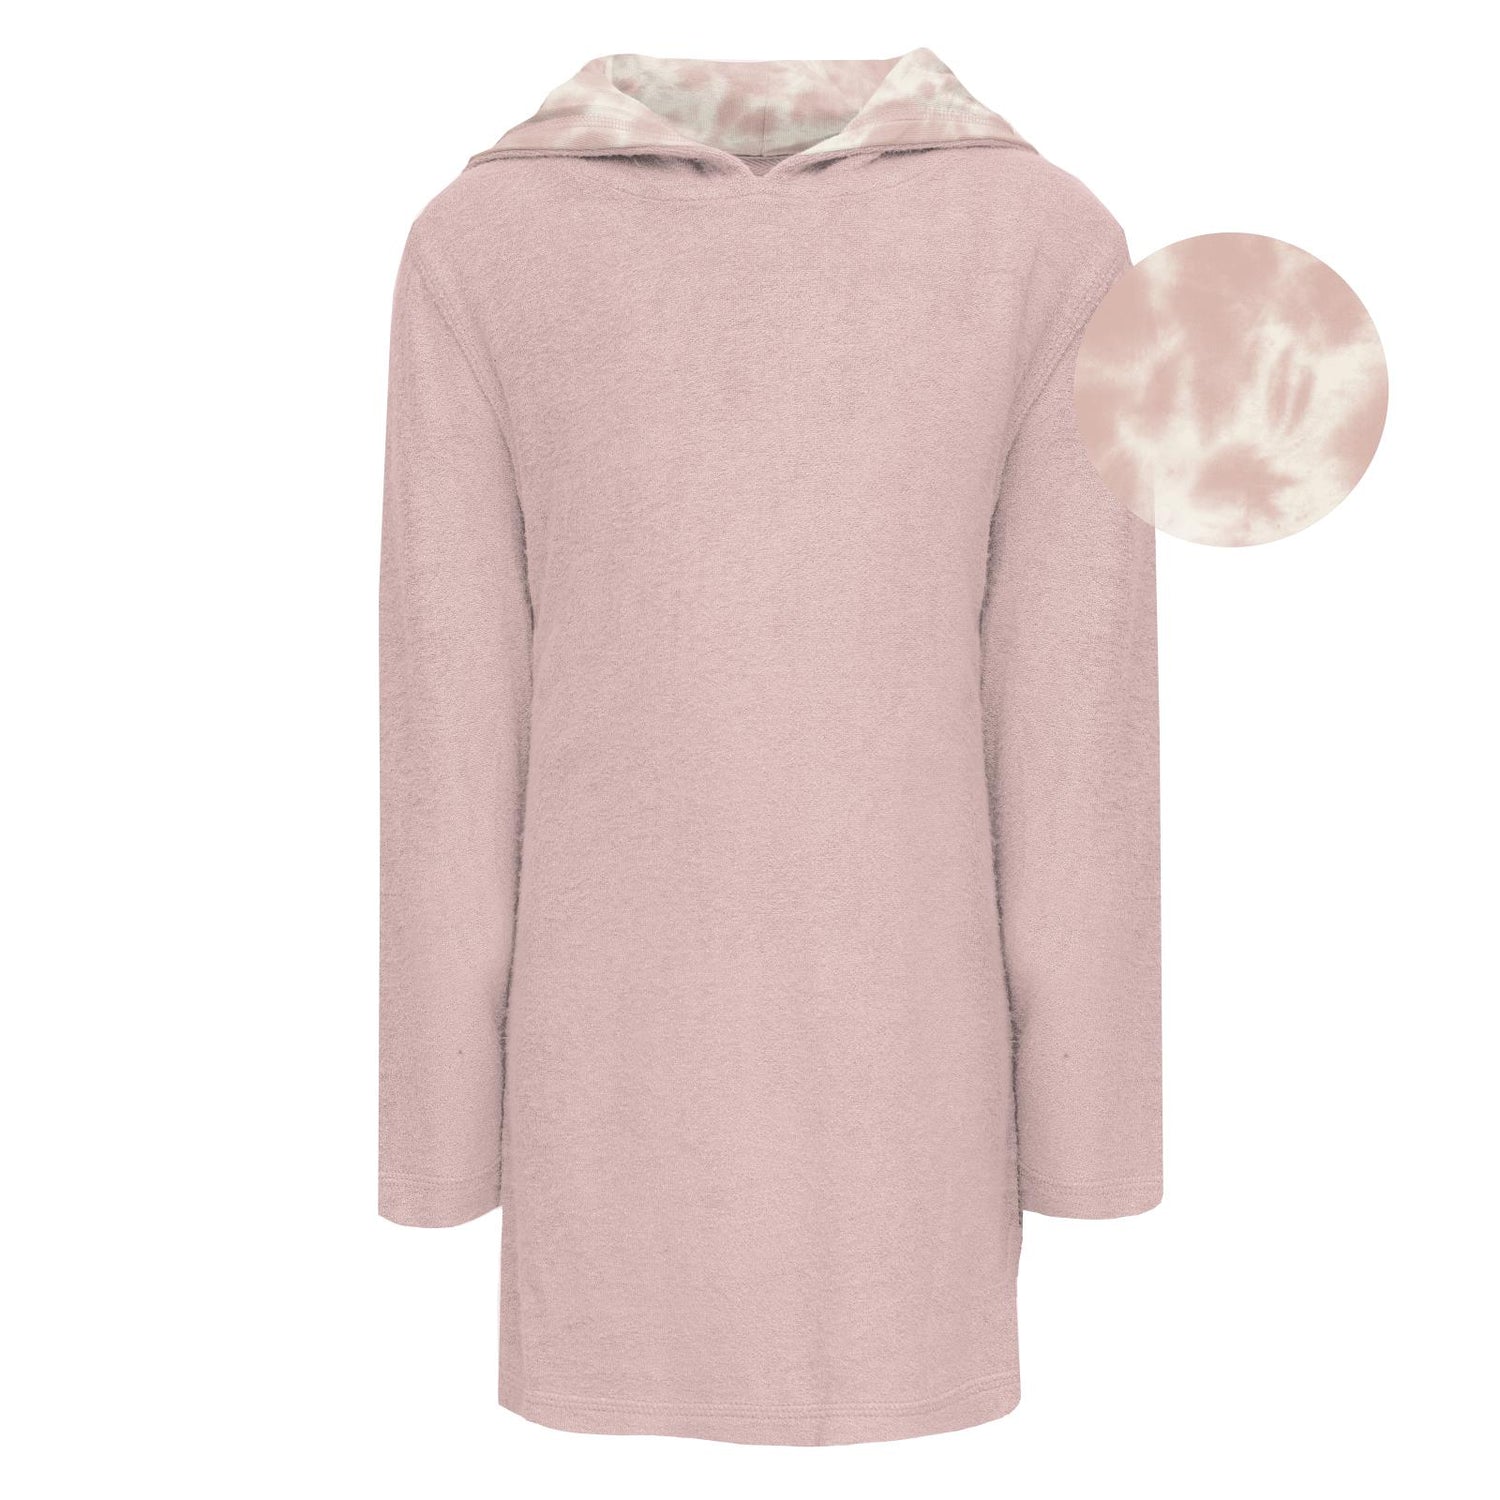 Terry Pull-over After Swim Robe with Print Lined Hood in Baby Rose with Baby Rose Tie Dye